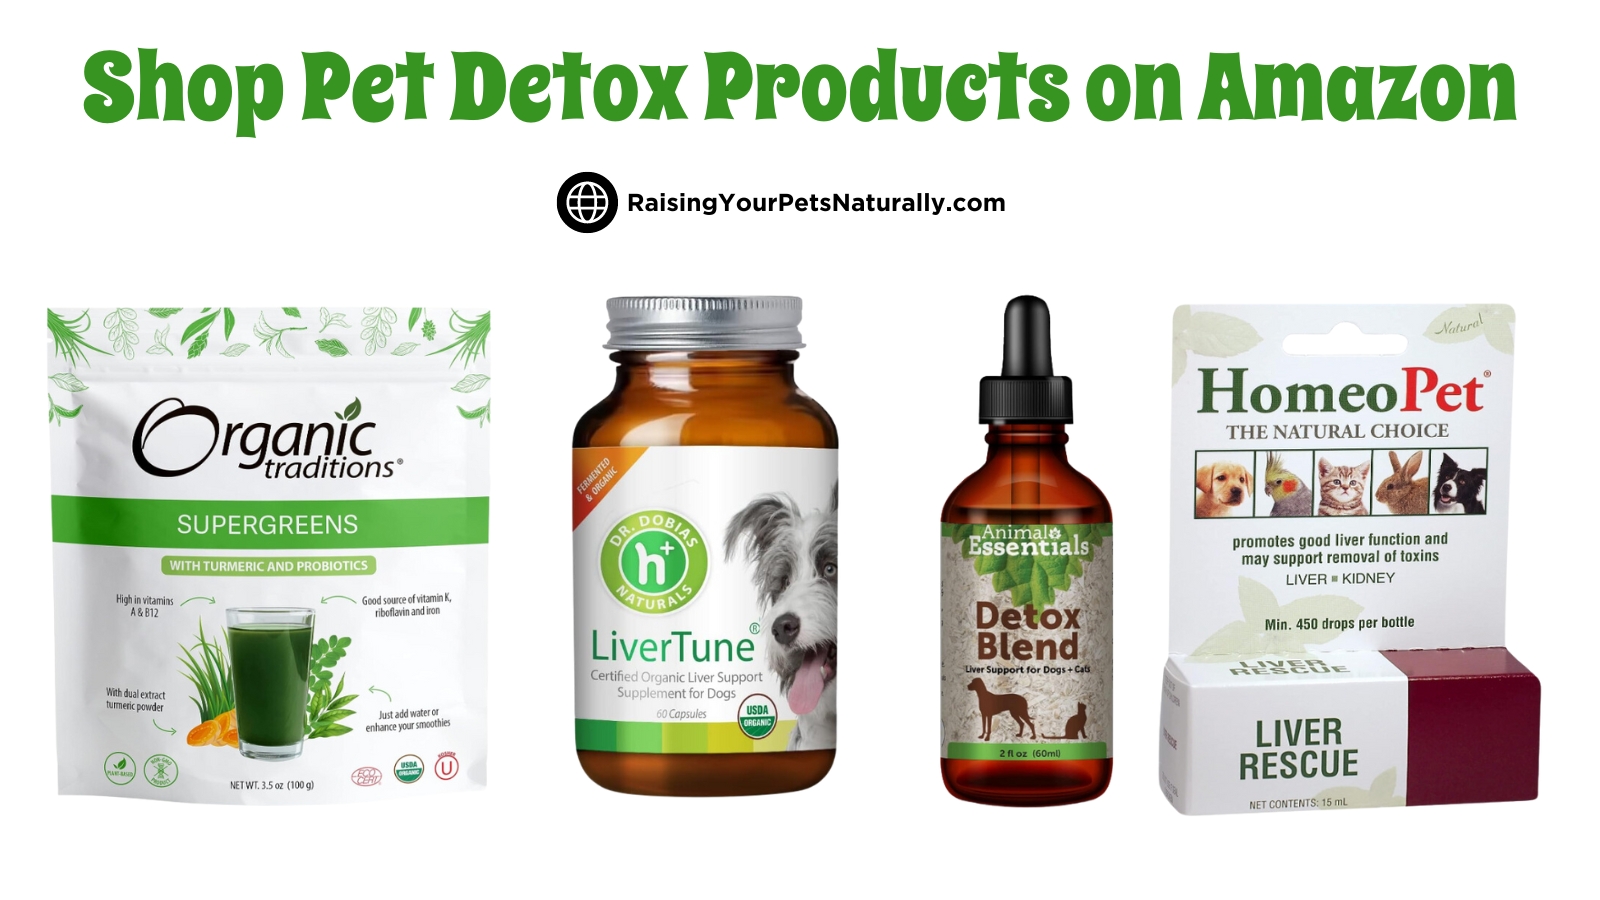 Should You Naturally Detox Your Pet? Learn the Benefits and Risks in Pet Detoxification in Today's Blog. #raisingyourpetsnaturally #NaturalPetHealth #Detox #HolisticCare #HealthyFurBabies #PetDetox 